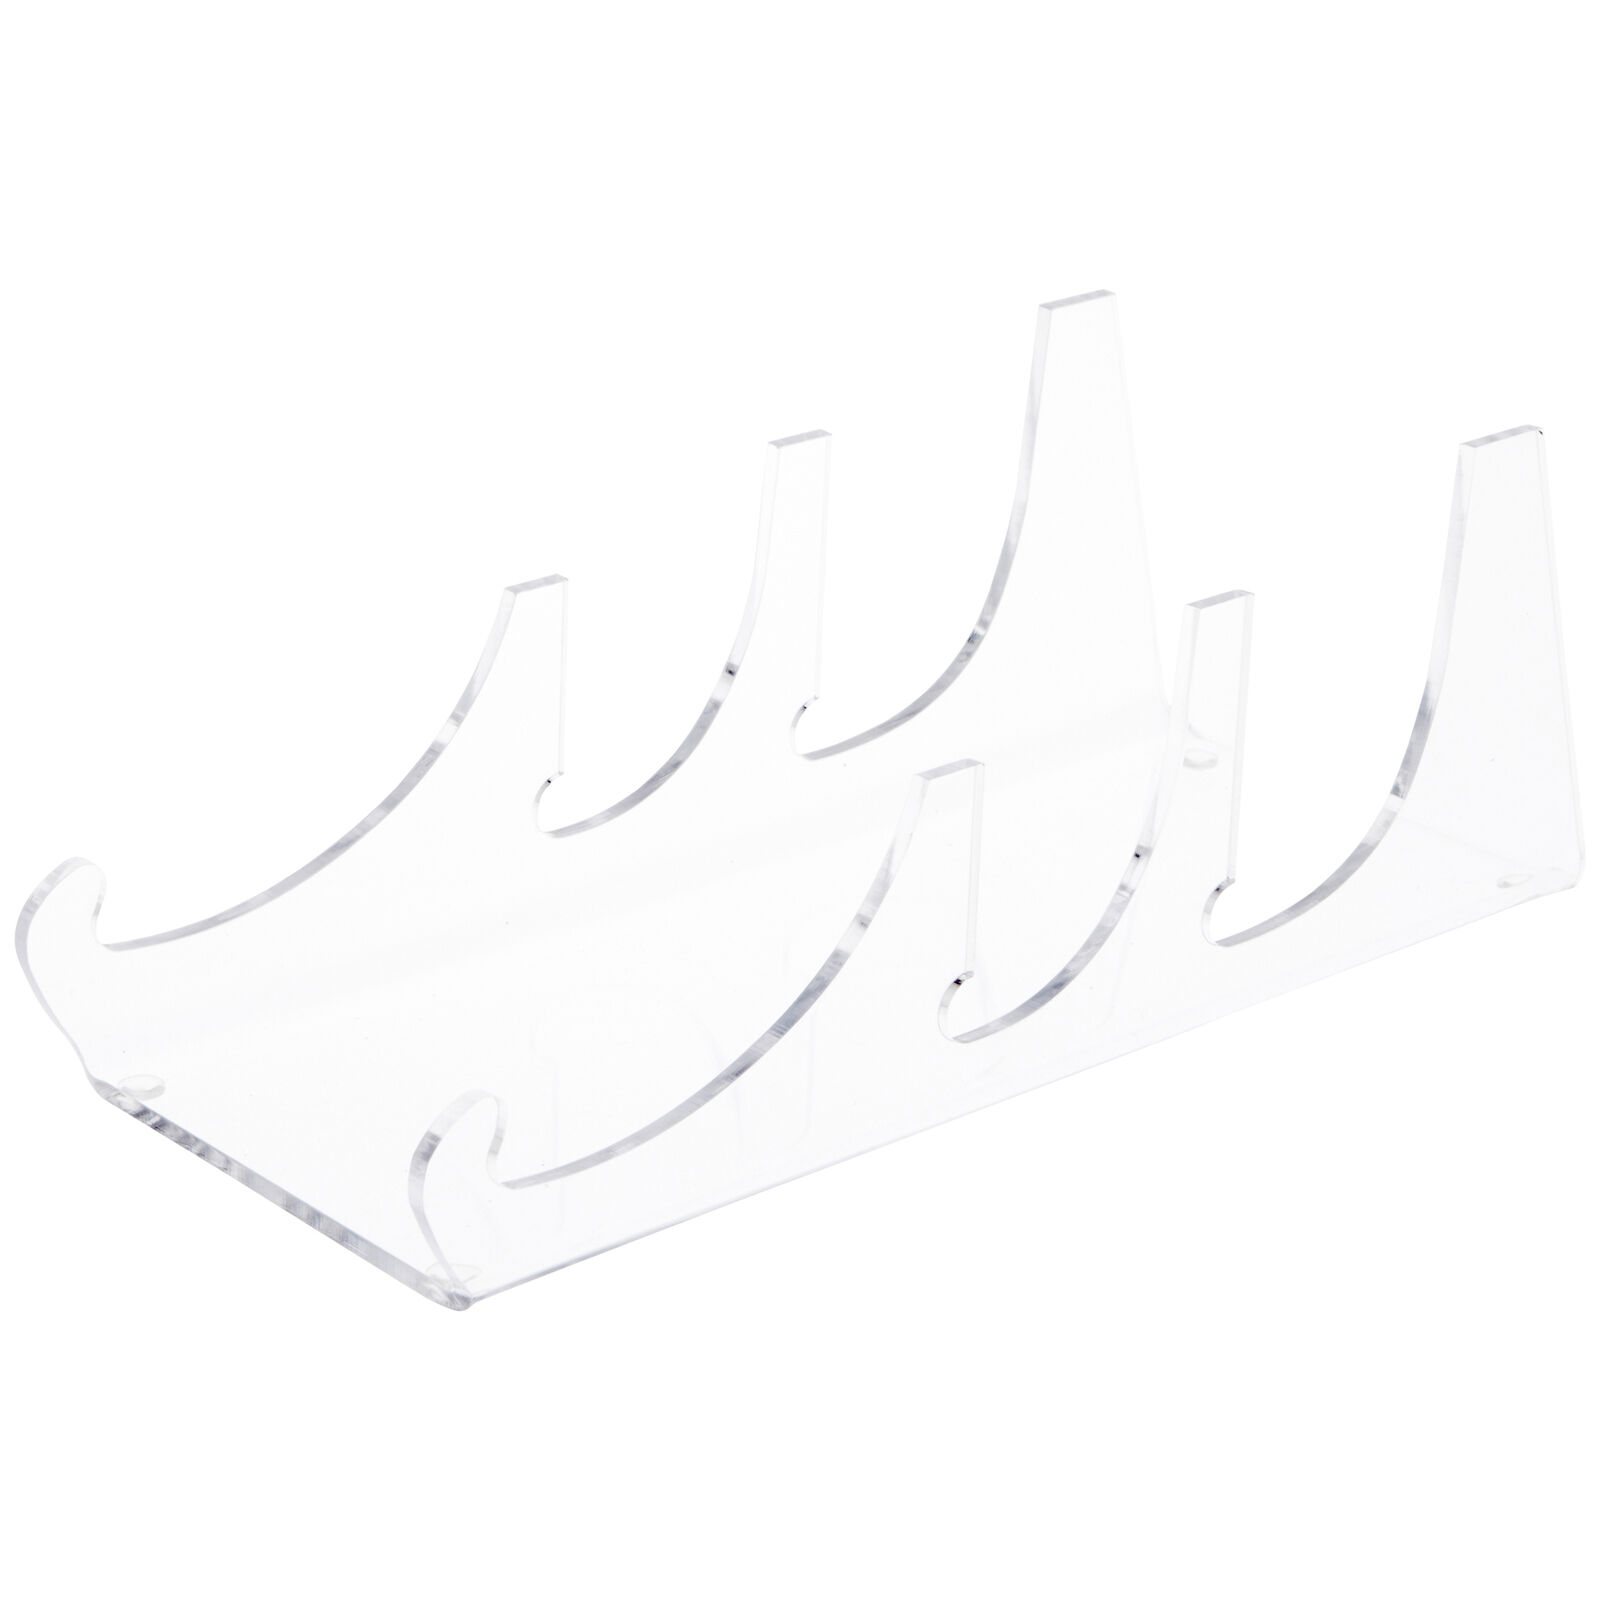 Plymor Acrylic 3 Piece Place Setting Holder, 3.25" H X 3.5" W X 8.75" D (3 Pack)